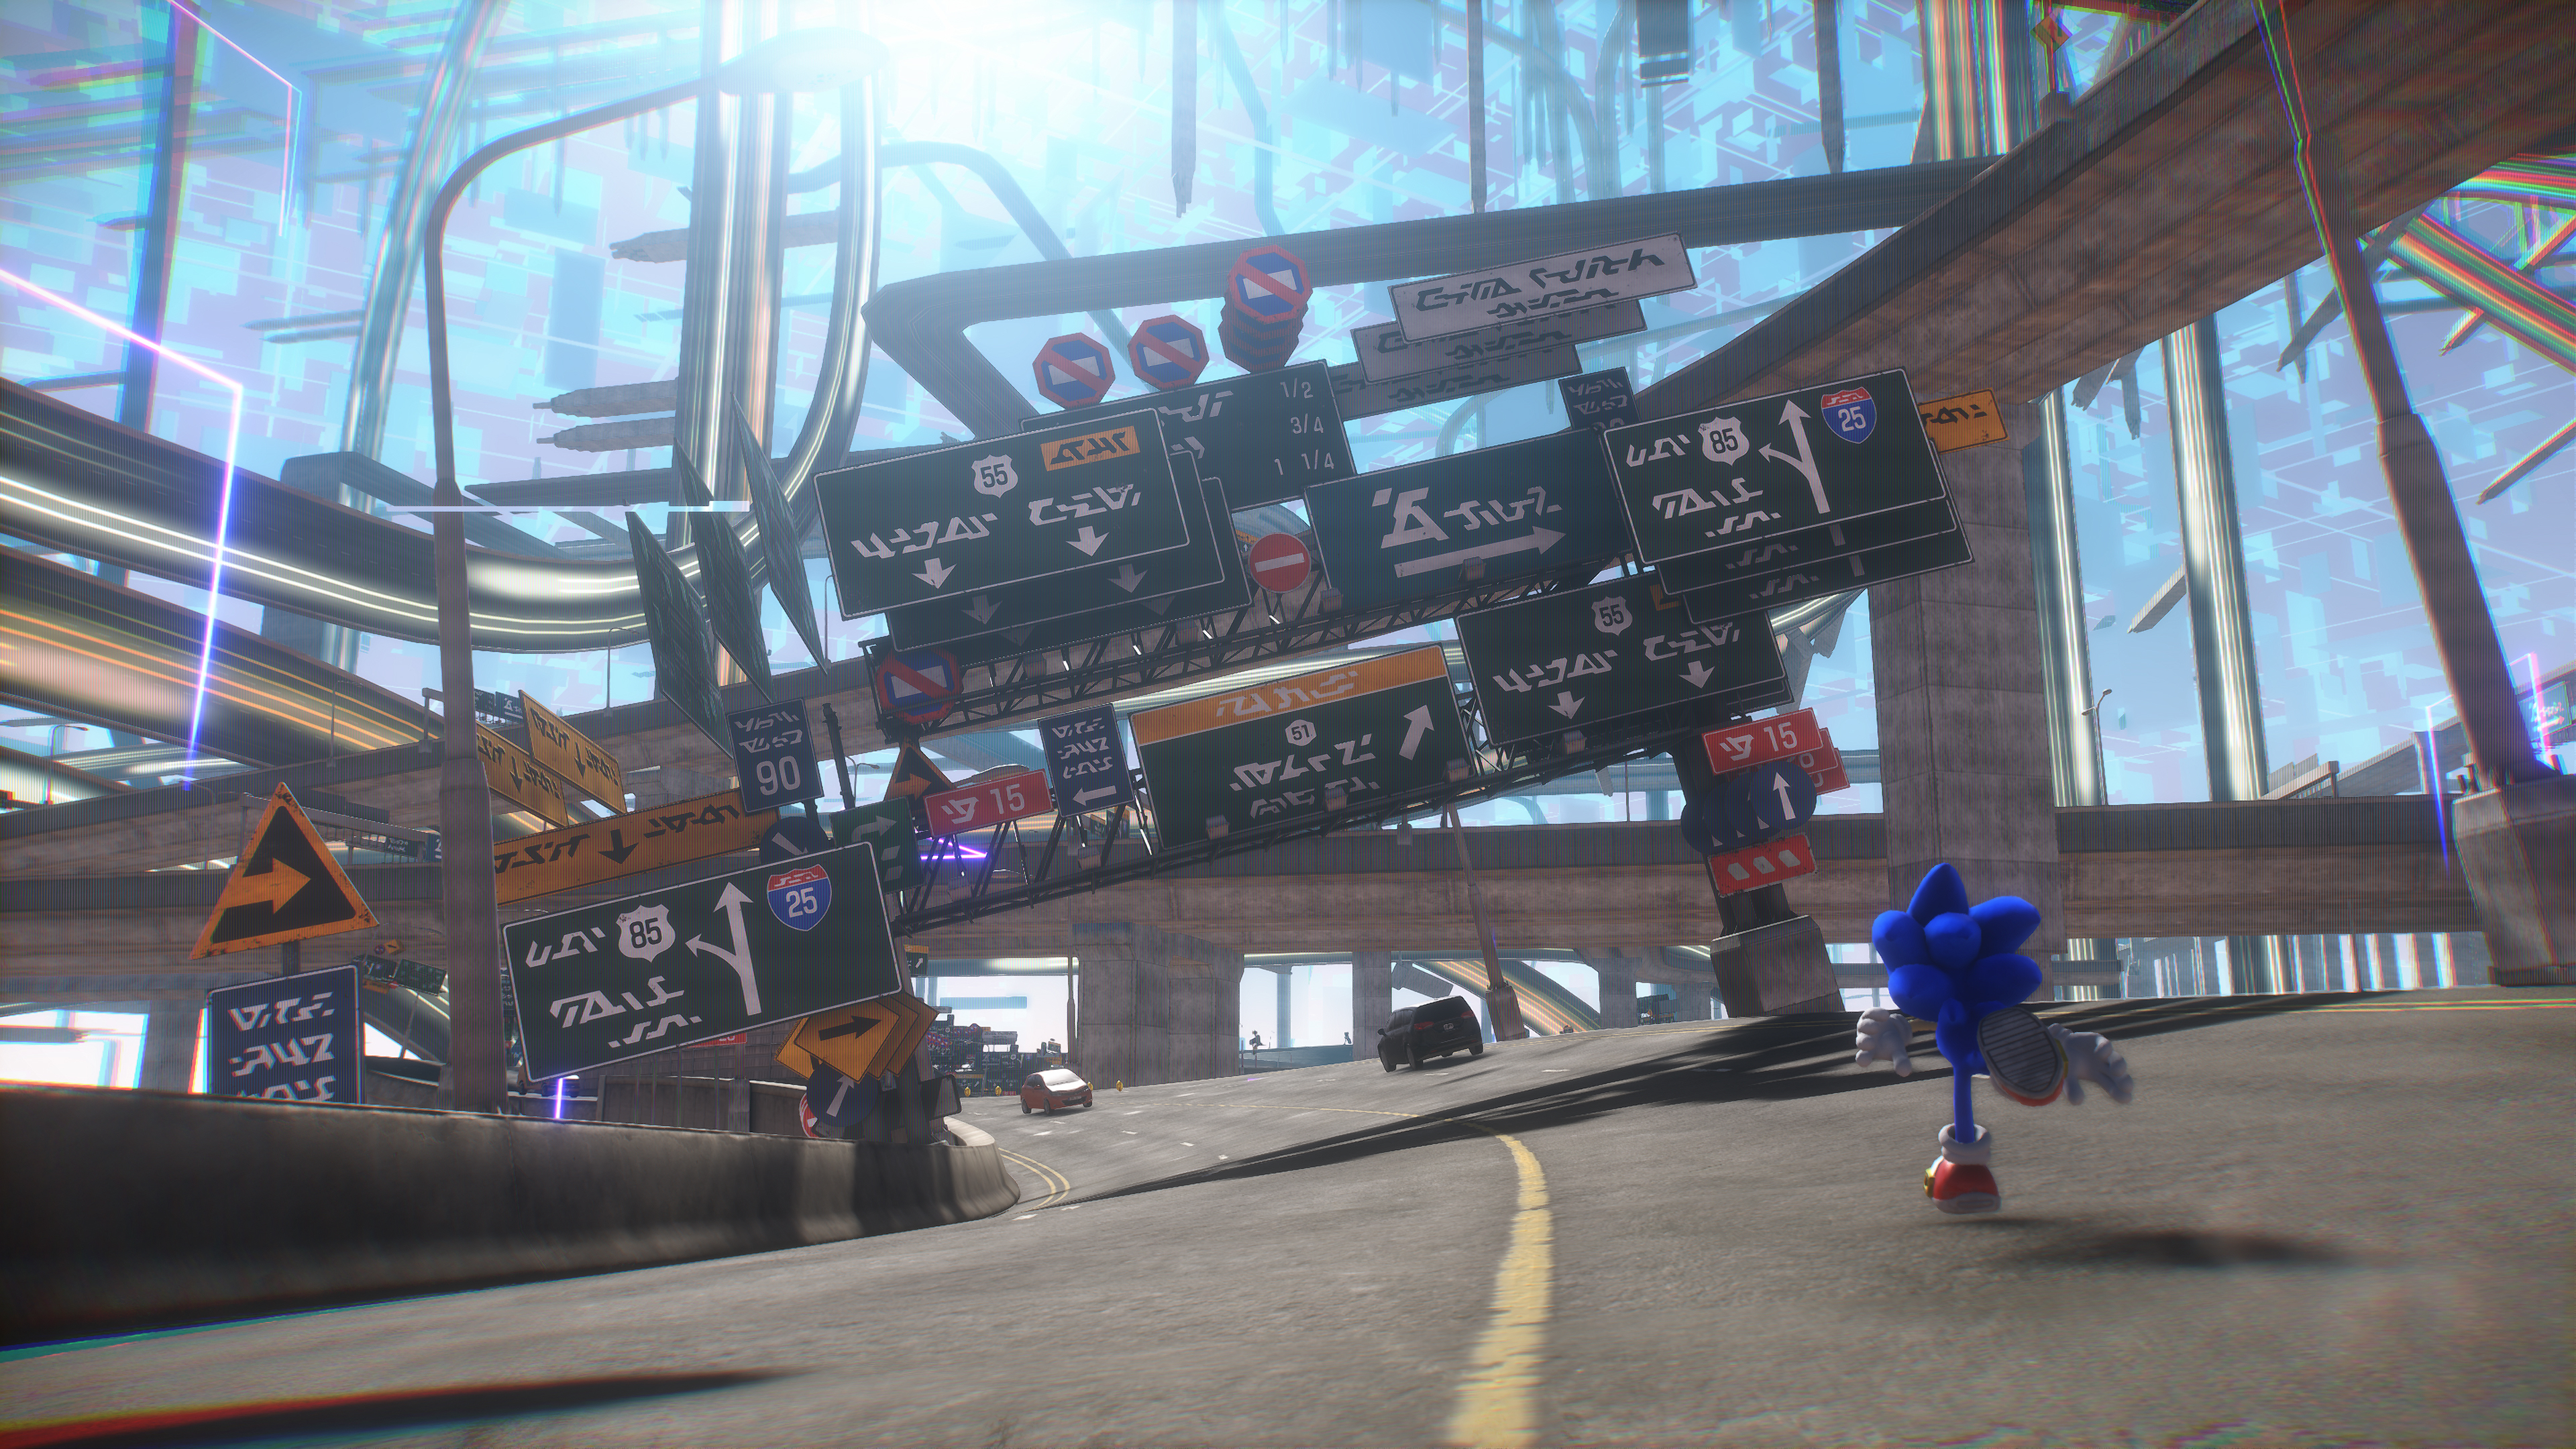 A screenshot of Sonic running on the highway